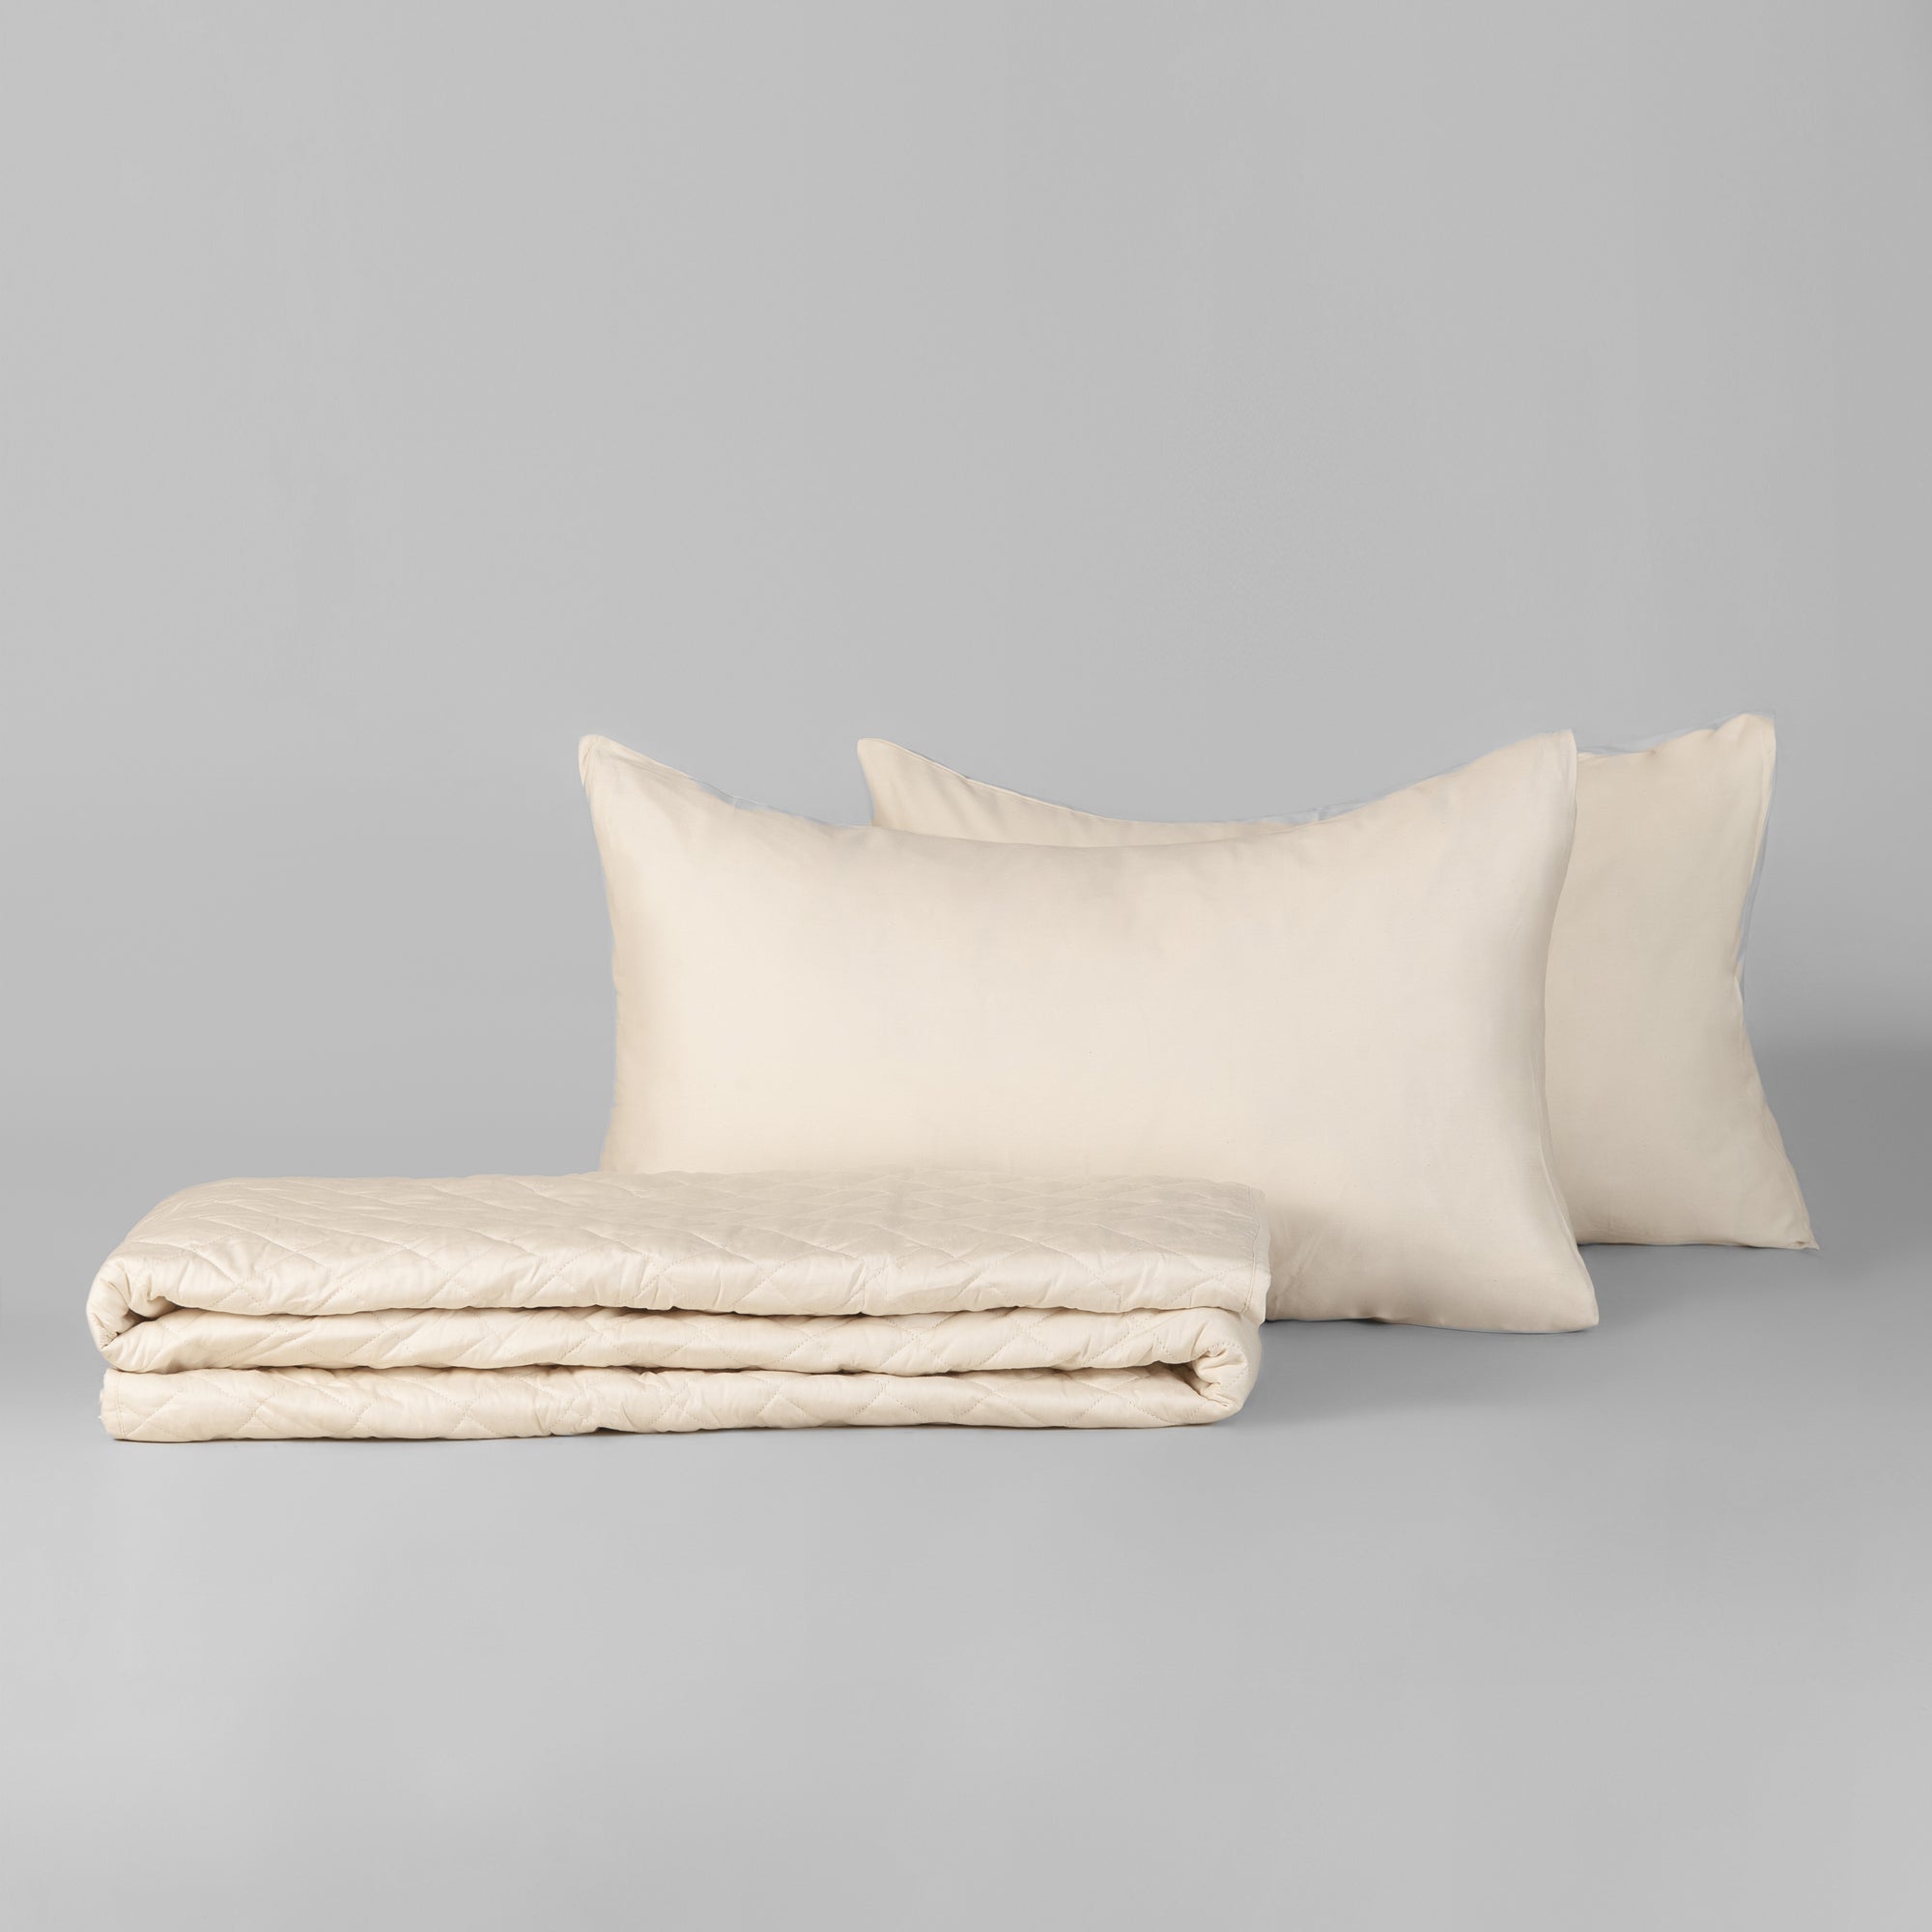 The Linen Company Bedding King Ivory Quilted Bedspread Set